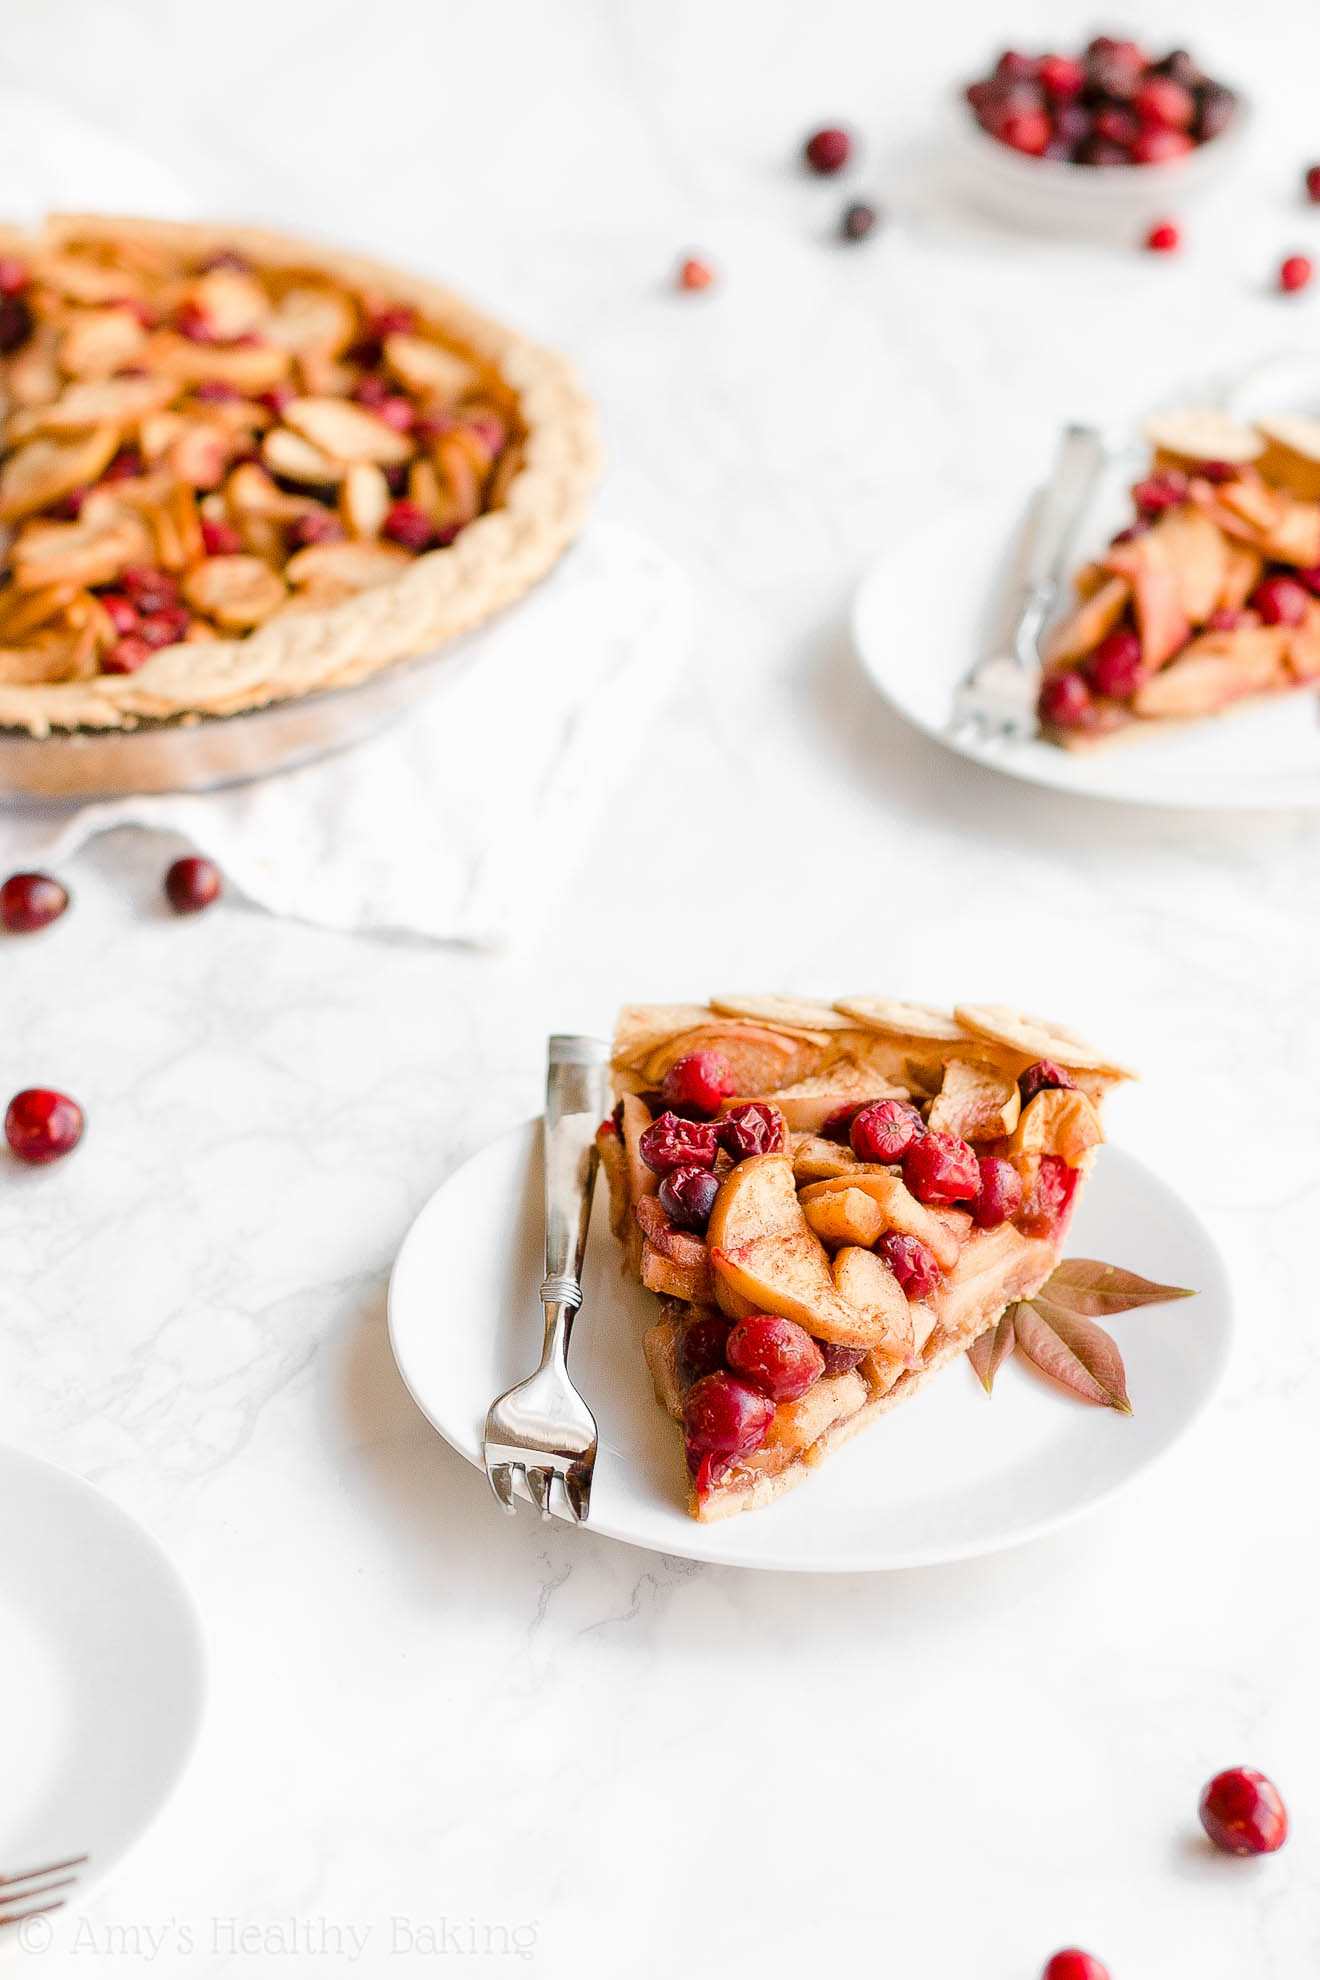 Healthy Apple Pie Recipes With Fresh Apples
 Healthy Cranberry Apple Pie